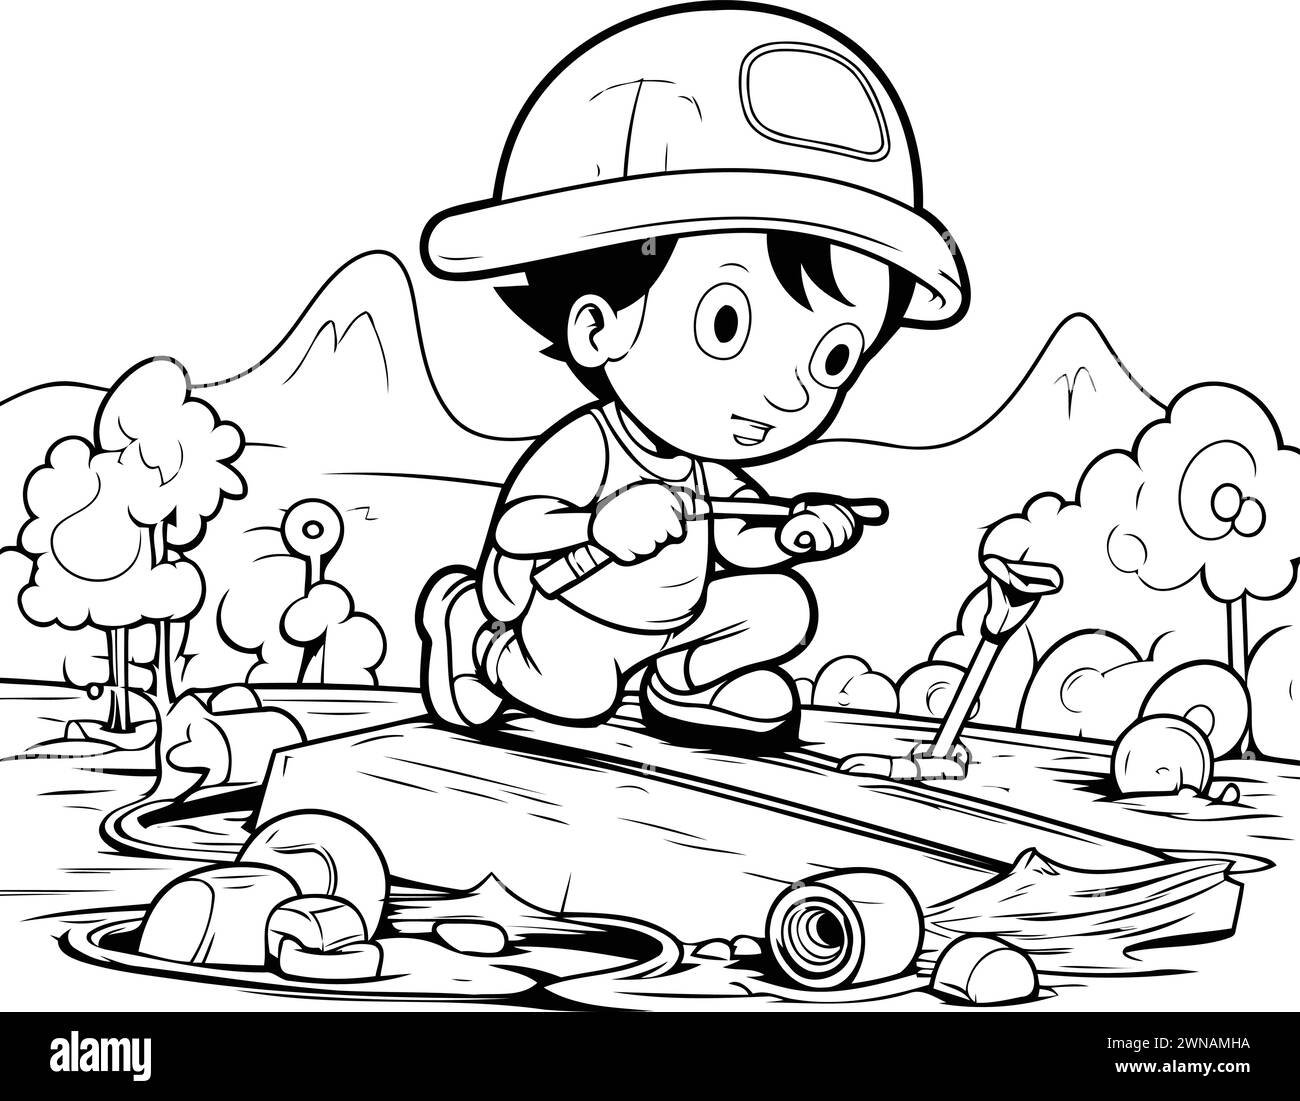 Black and White Cartoon Illustration of Kid Playing Skateboard in the Park Coloring Book Stock Vector